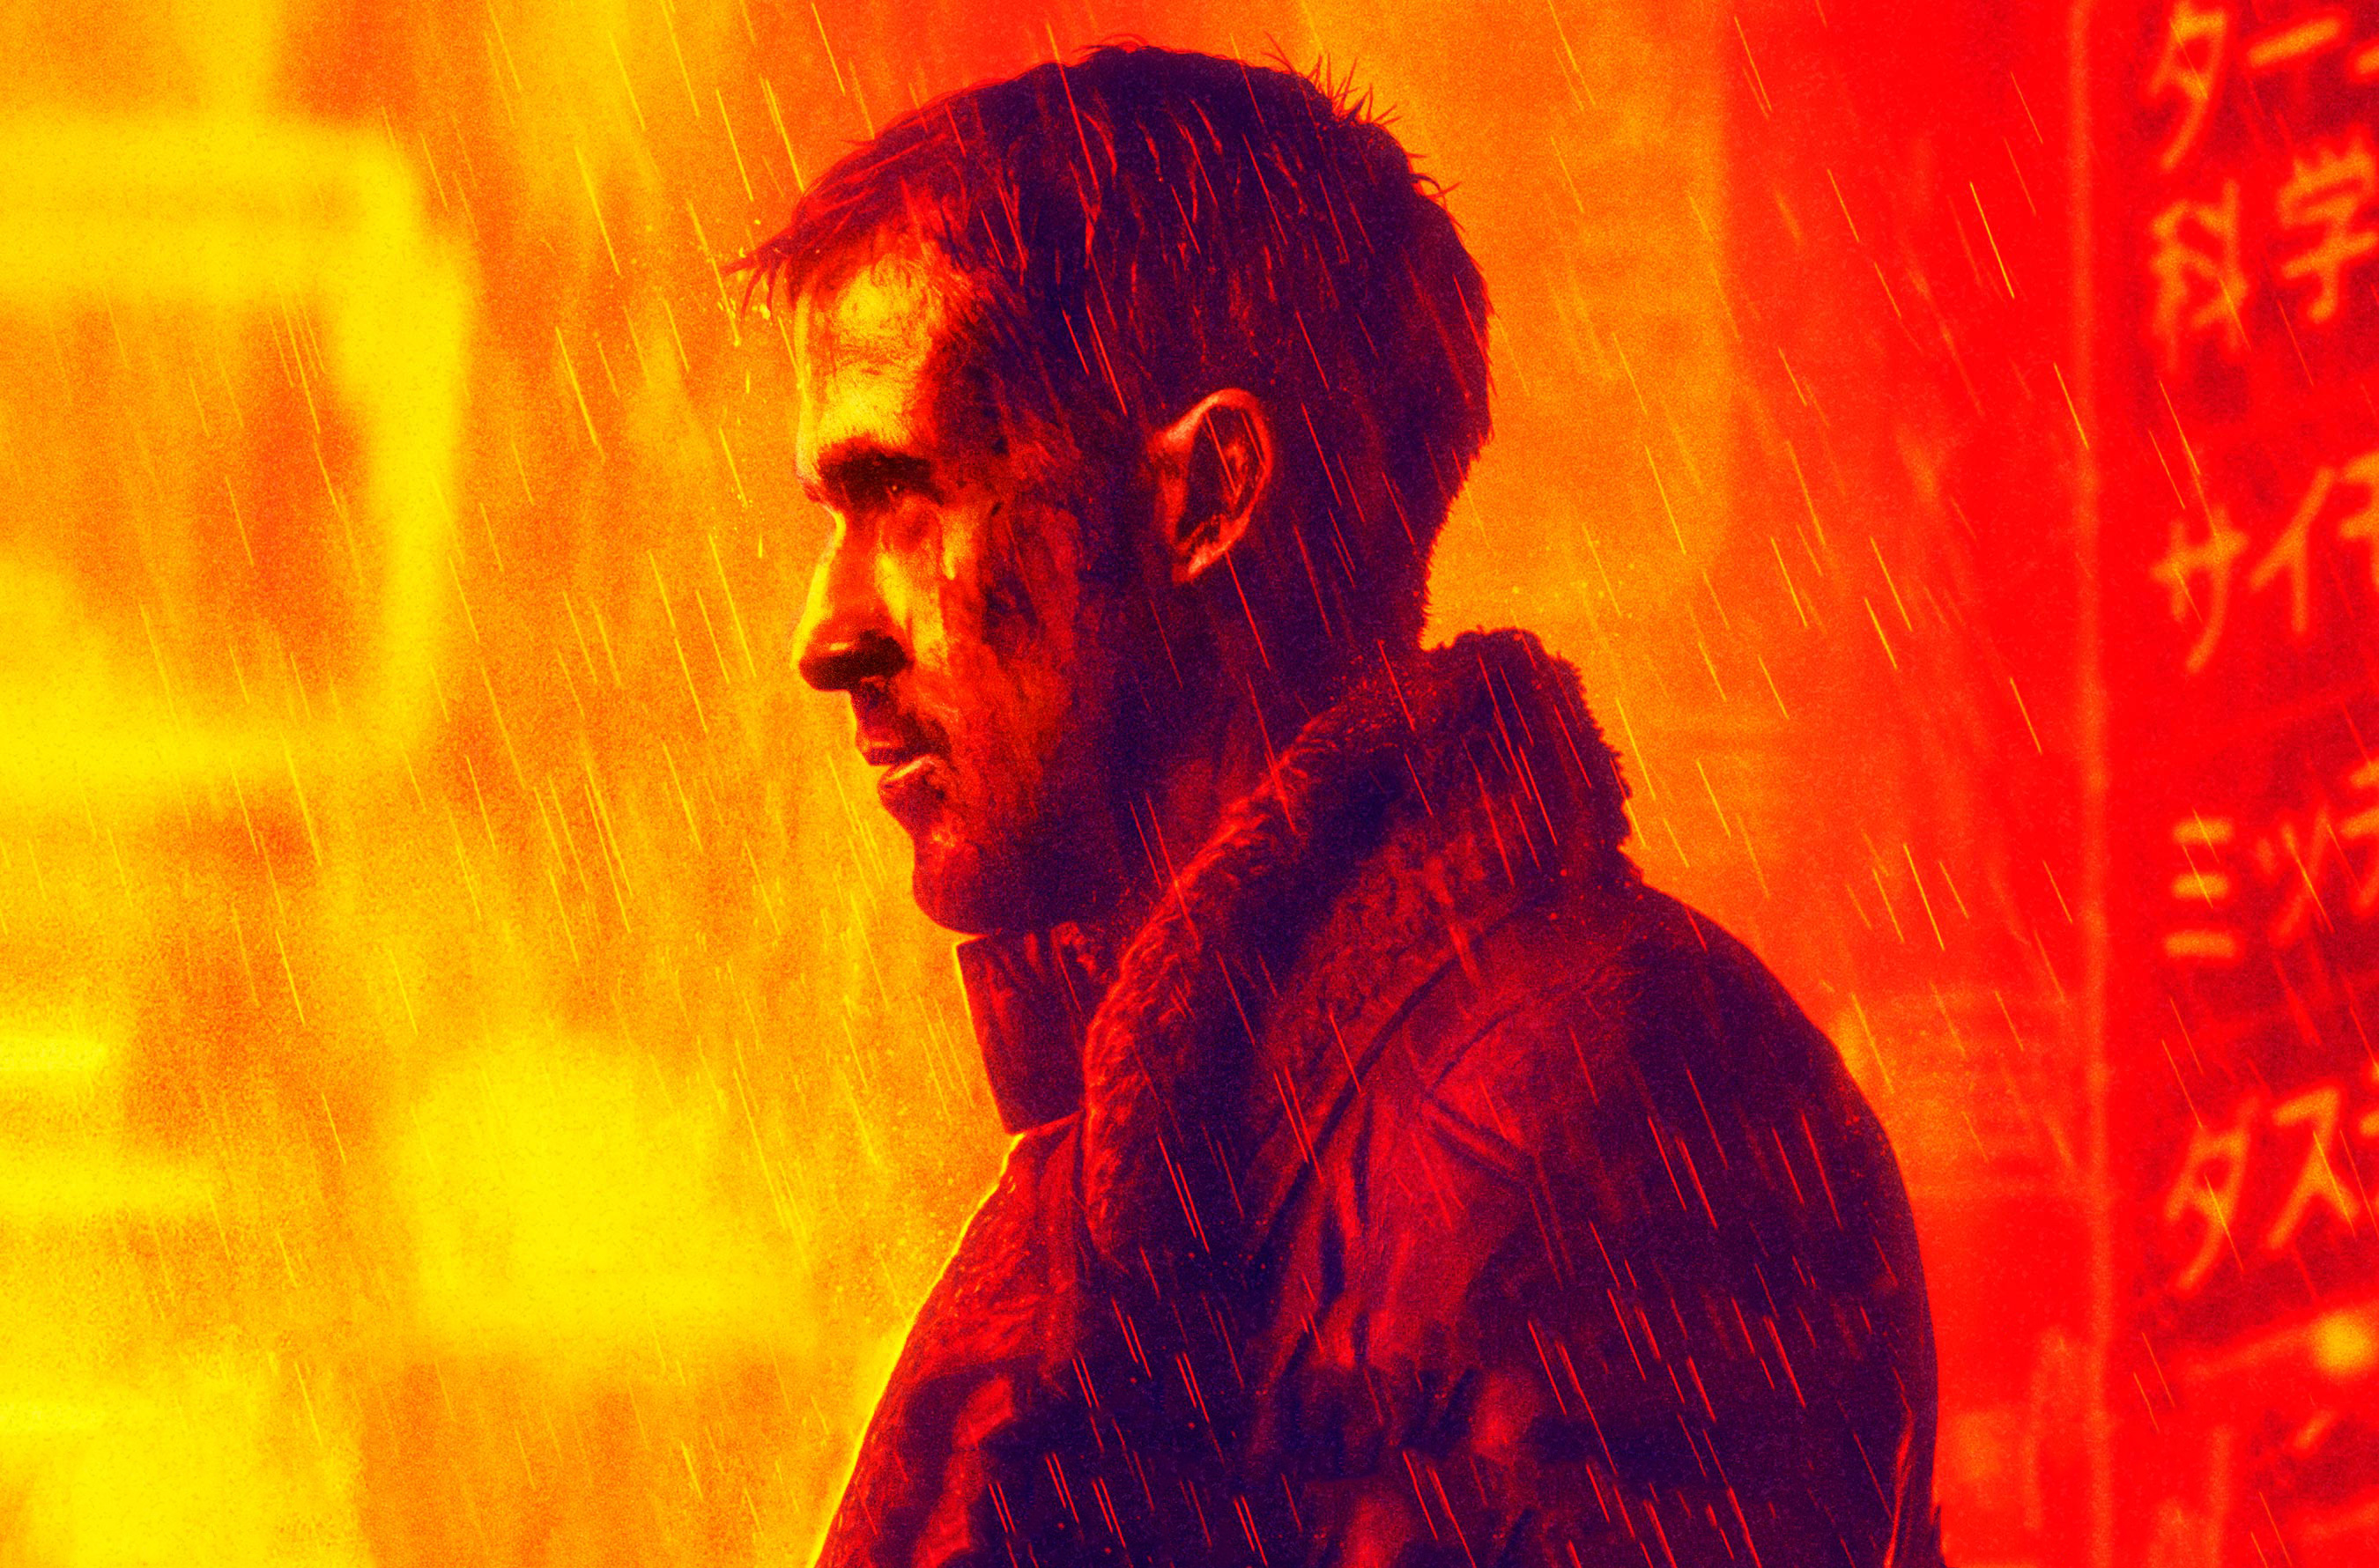 19x Ryan Gosling Blade Runner 49 19x Resolution Wallpaper Hd Movies 4k Wallpapers Images Photos And Background Wallpapers Den